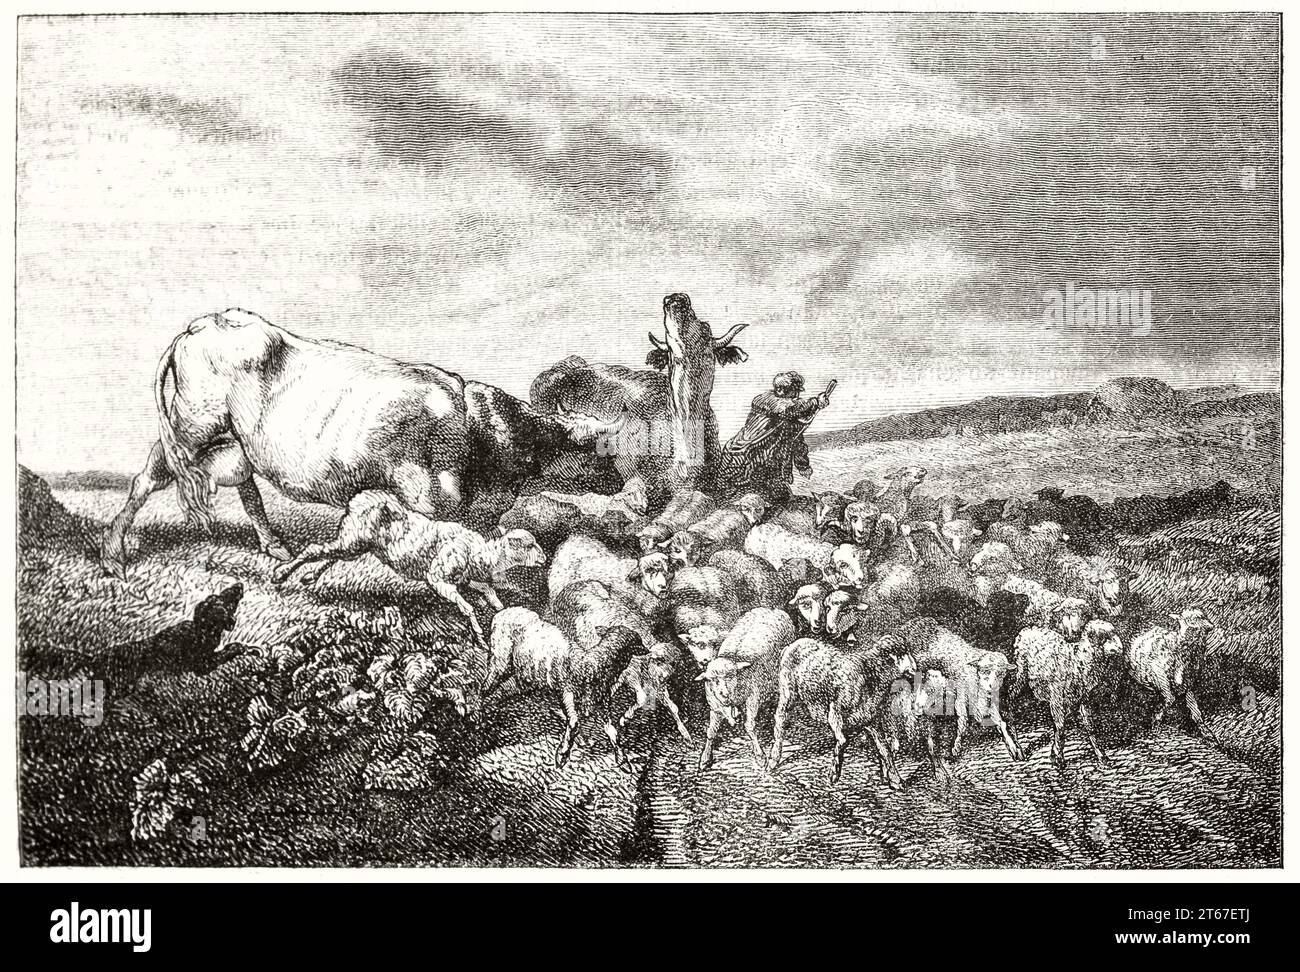 Old illustration of sheeps, cows and shepherd. By Daubigny, publ. on Magasin Pittoresque, Paris, 1851 Stock Photo